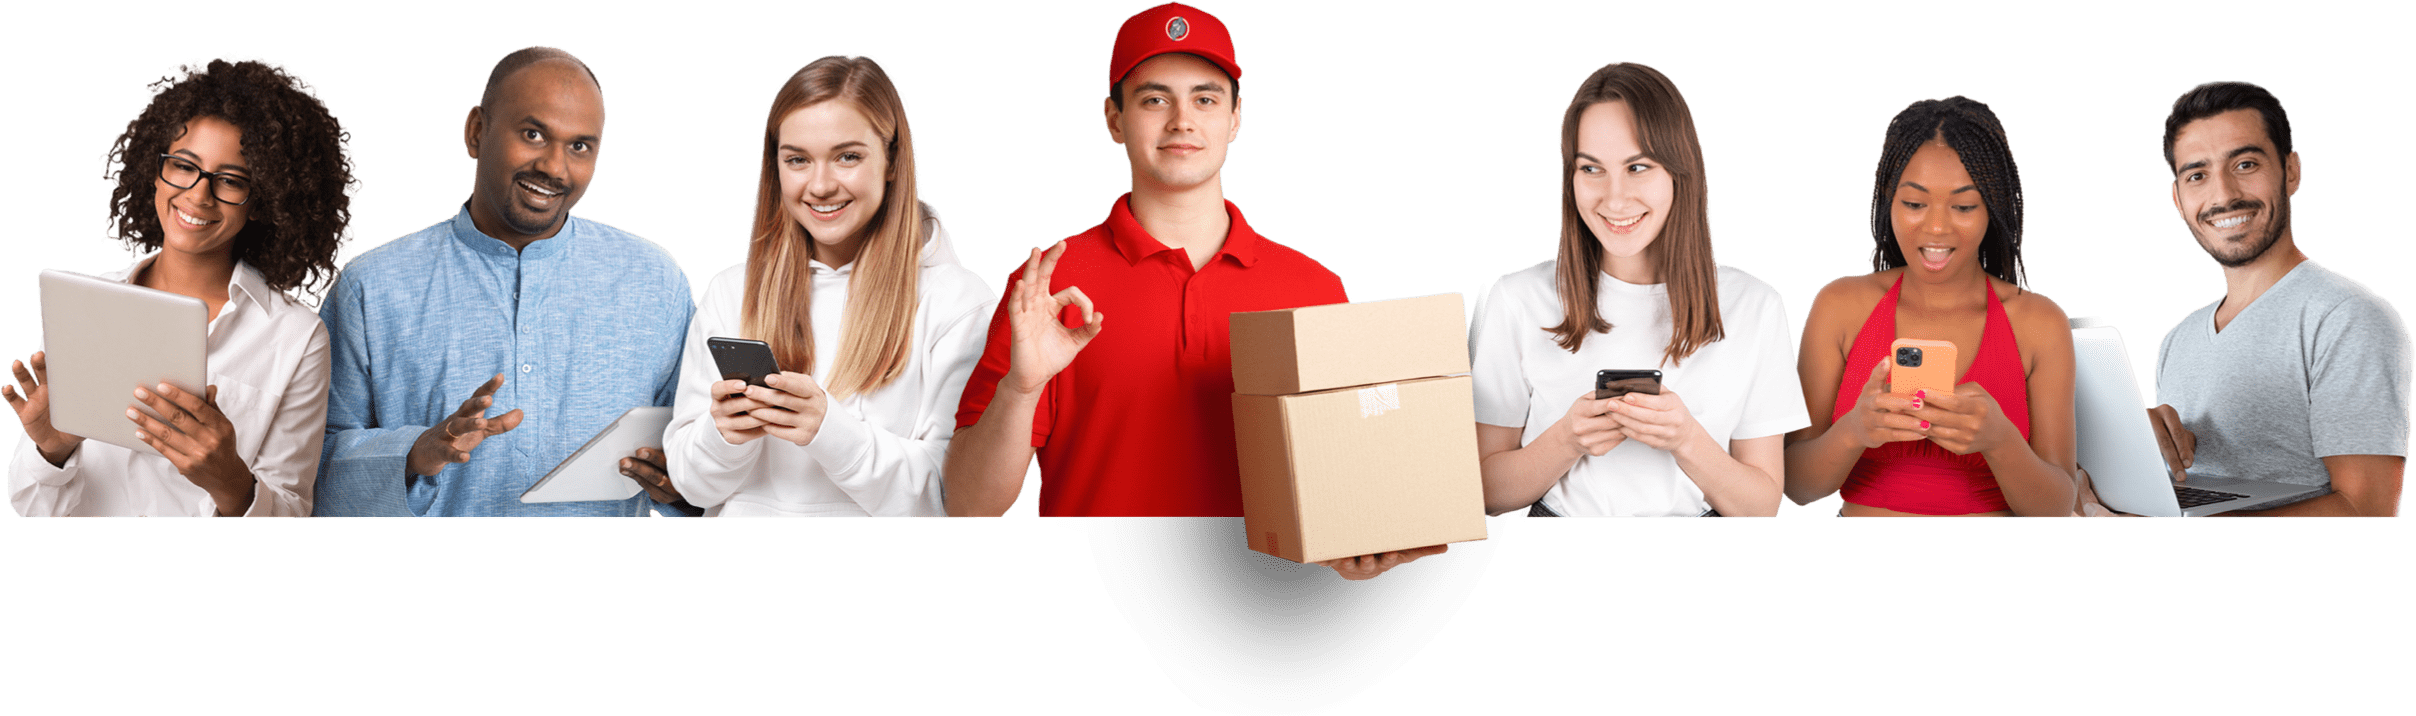 Rancho Cucamonga Movers people with reviews